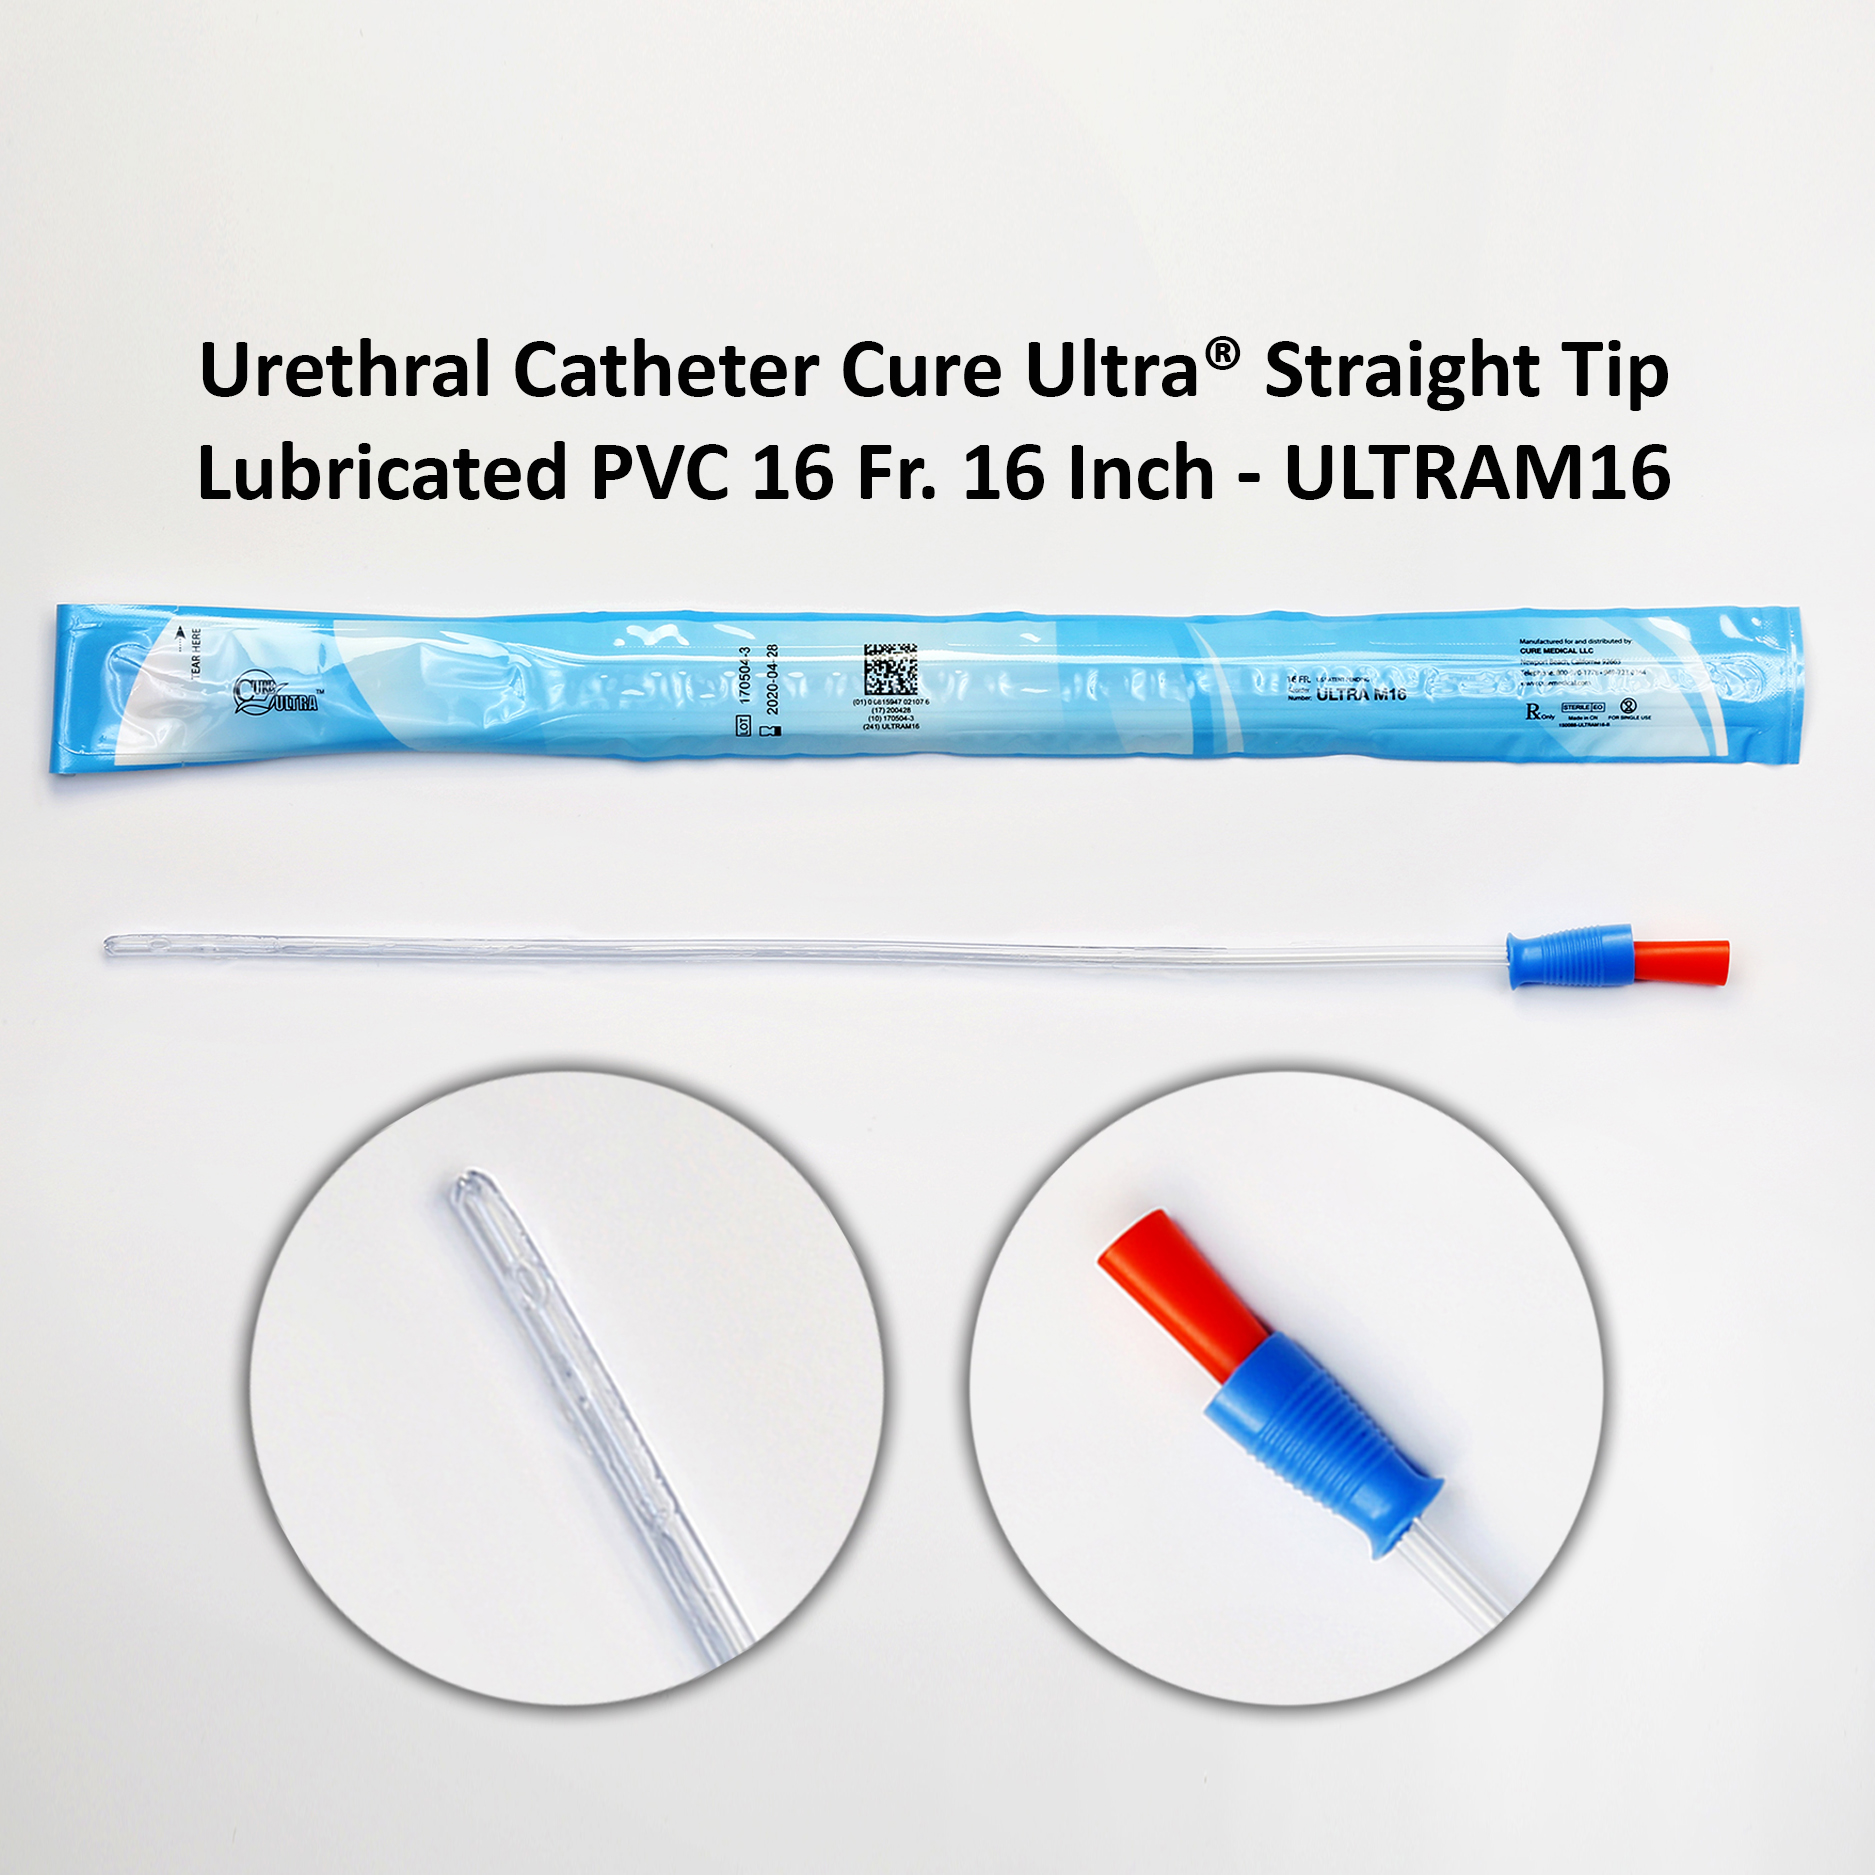 Urethral Catheter Cure Ultra® Straight Tip Lubricated PVC 16 Fr. 16 Inch - ULTRAM16